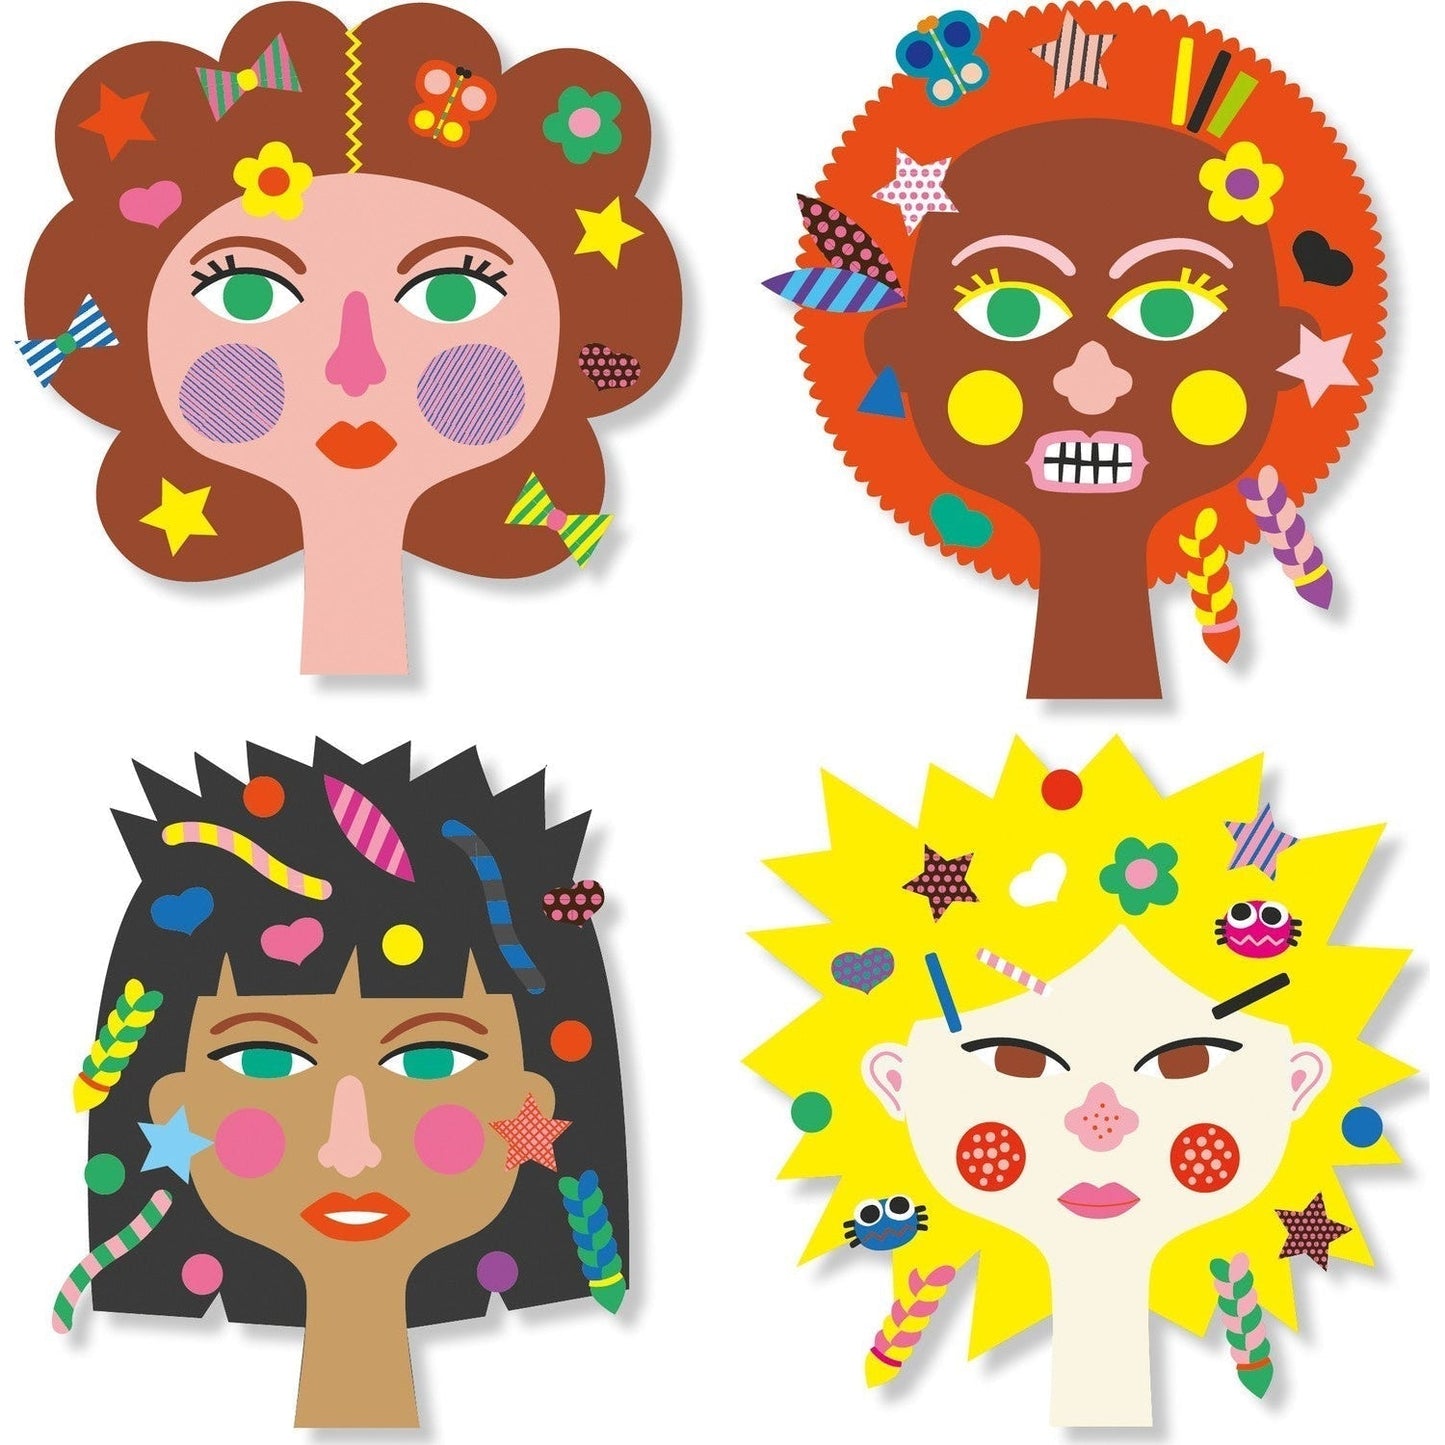 Hairdresser - Small Gifts For Little Ones - Stickers